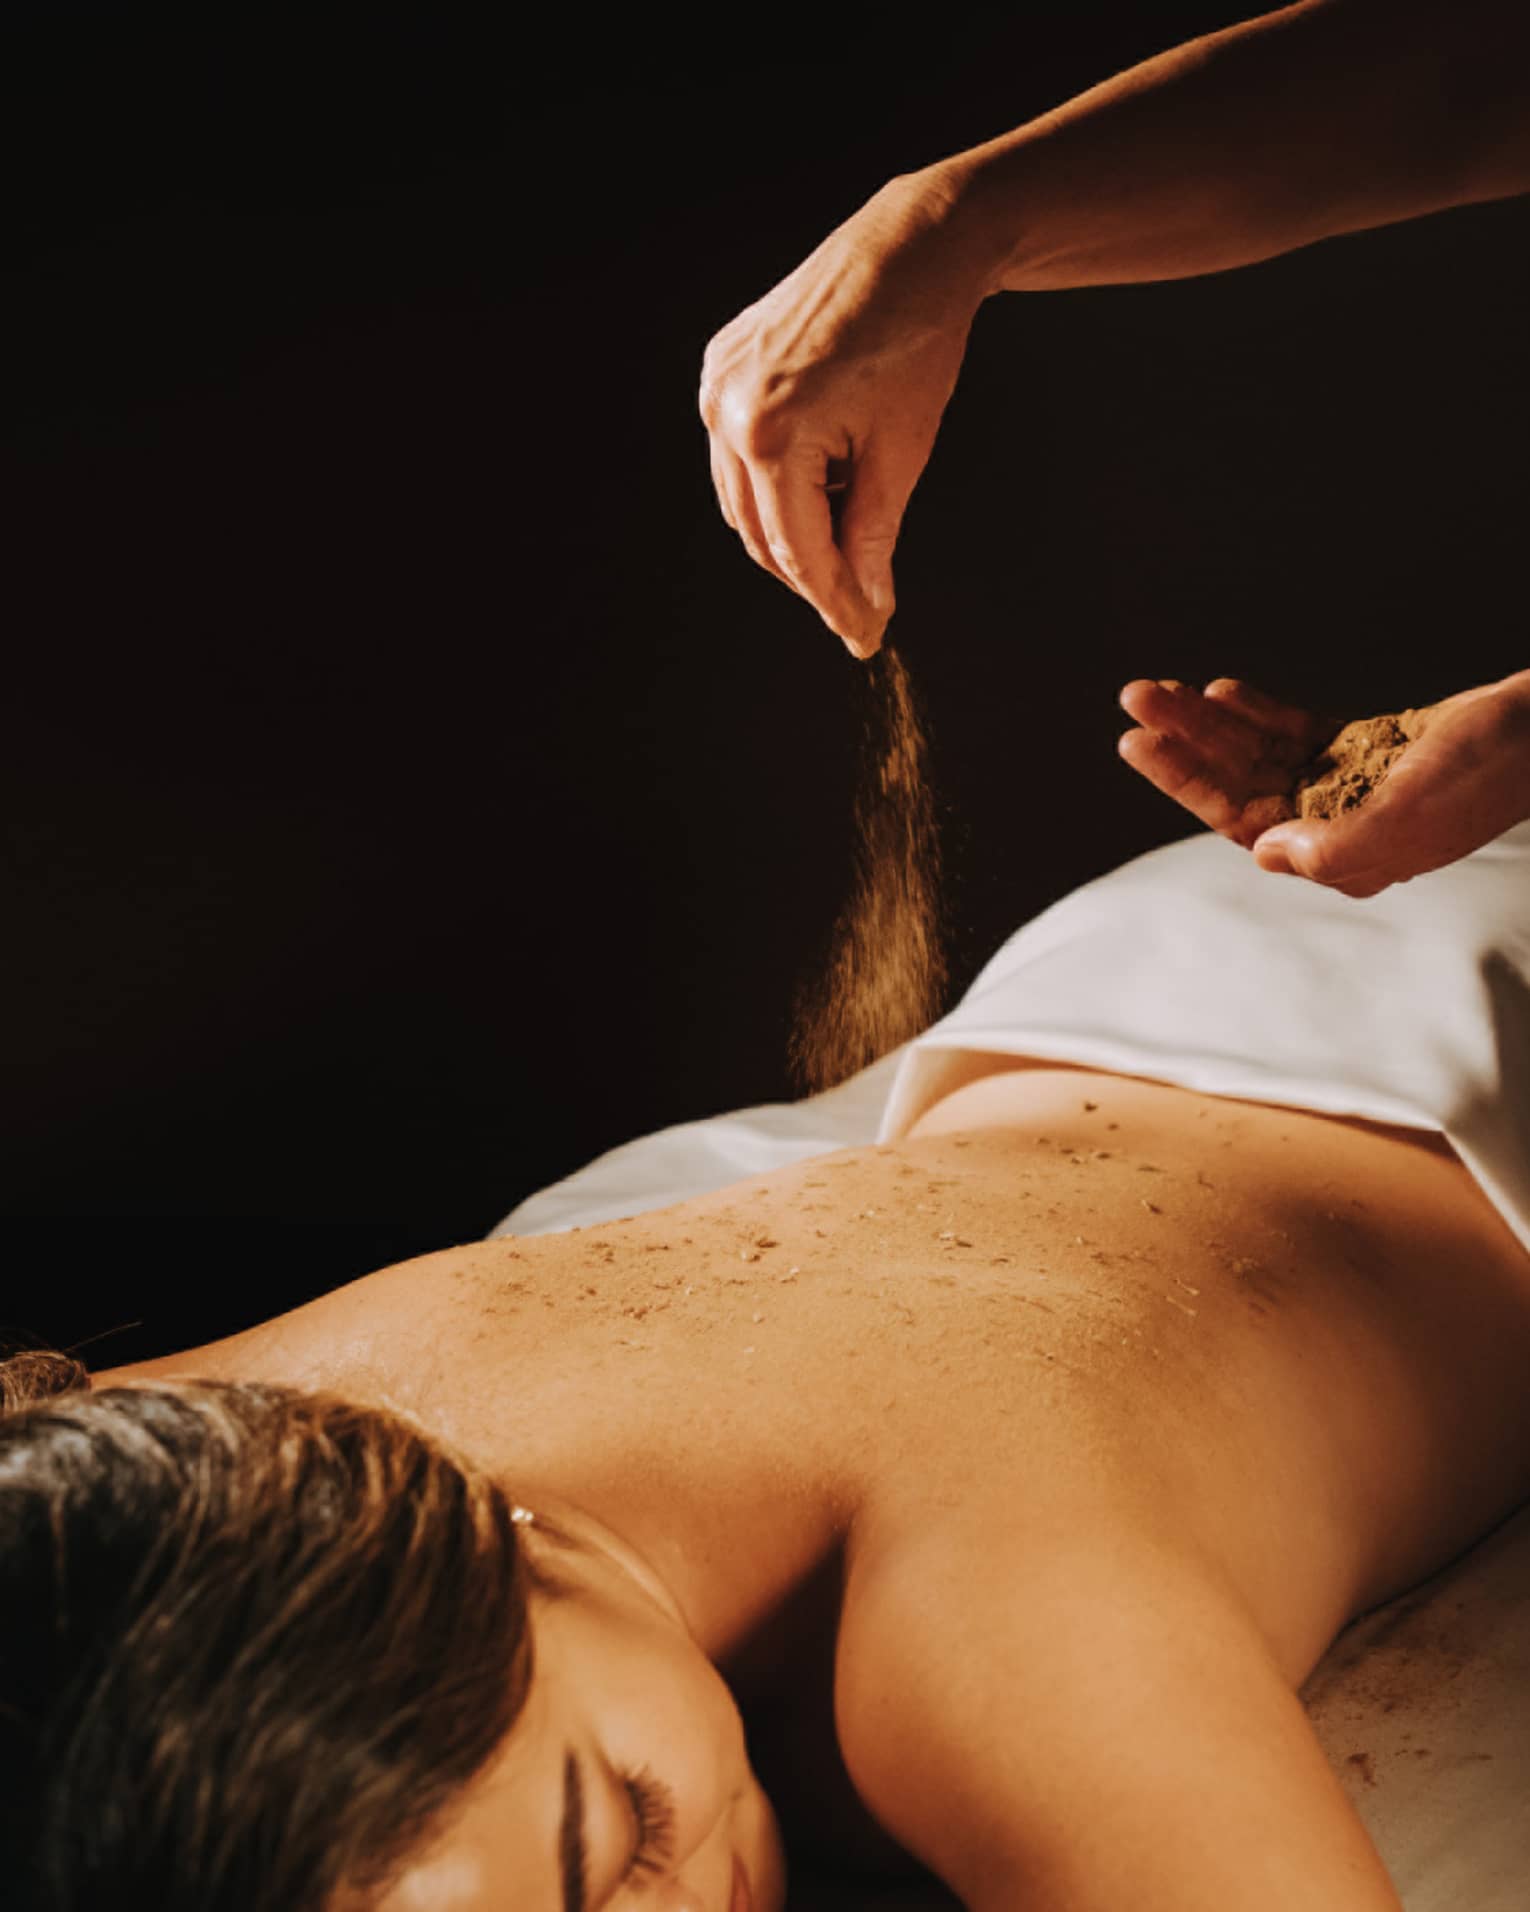 Spa staff sprinkled coffee powder over woman's bare back as she lays on massage table